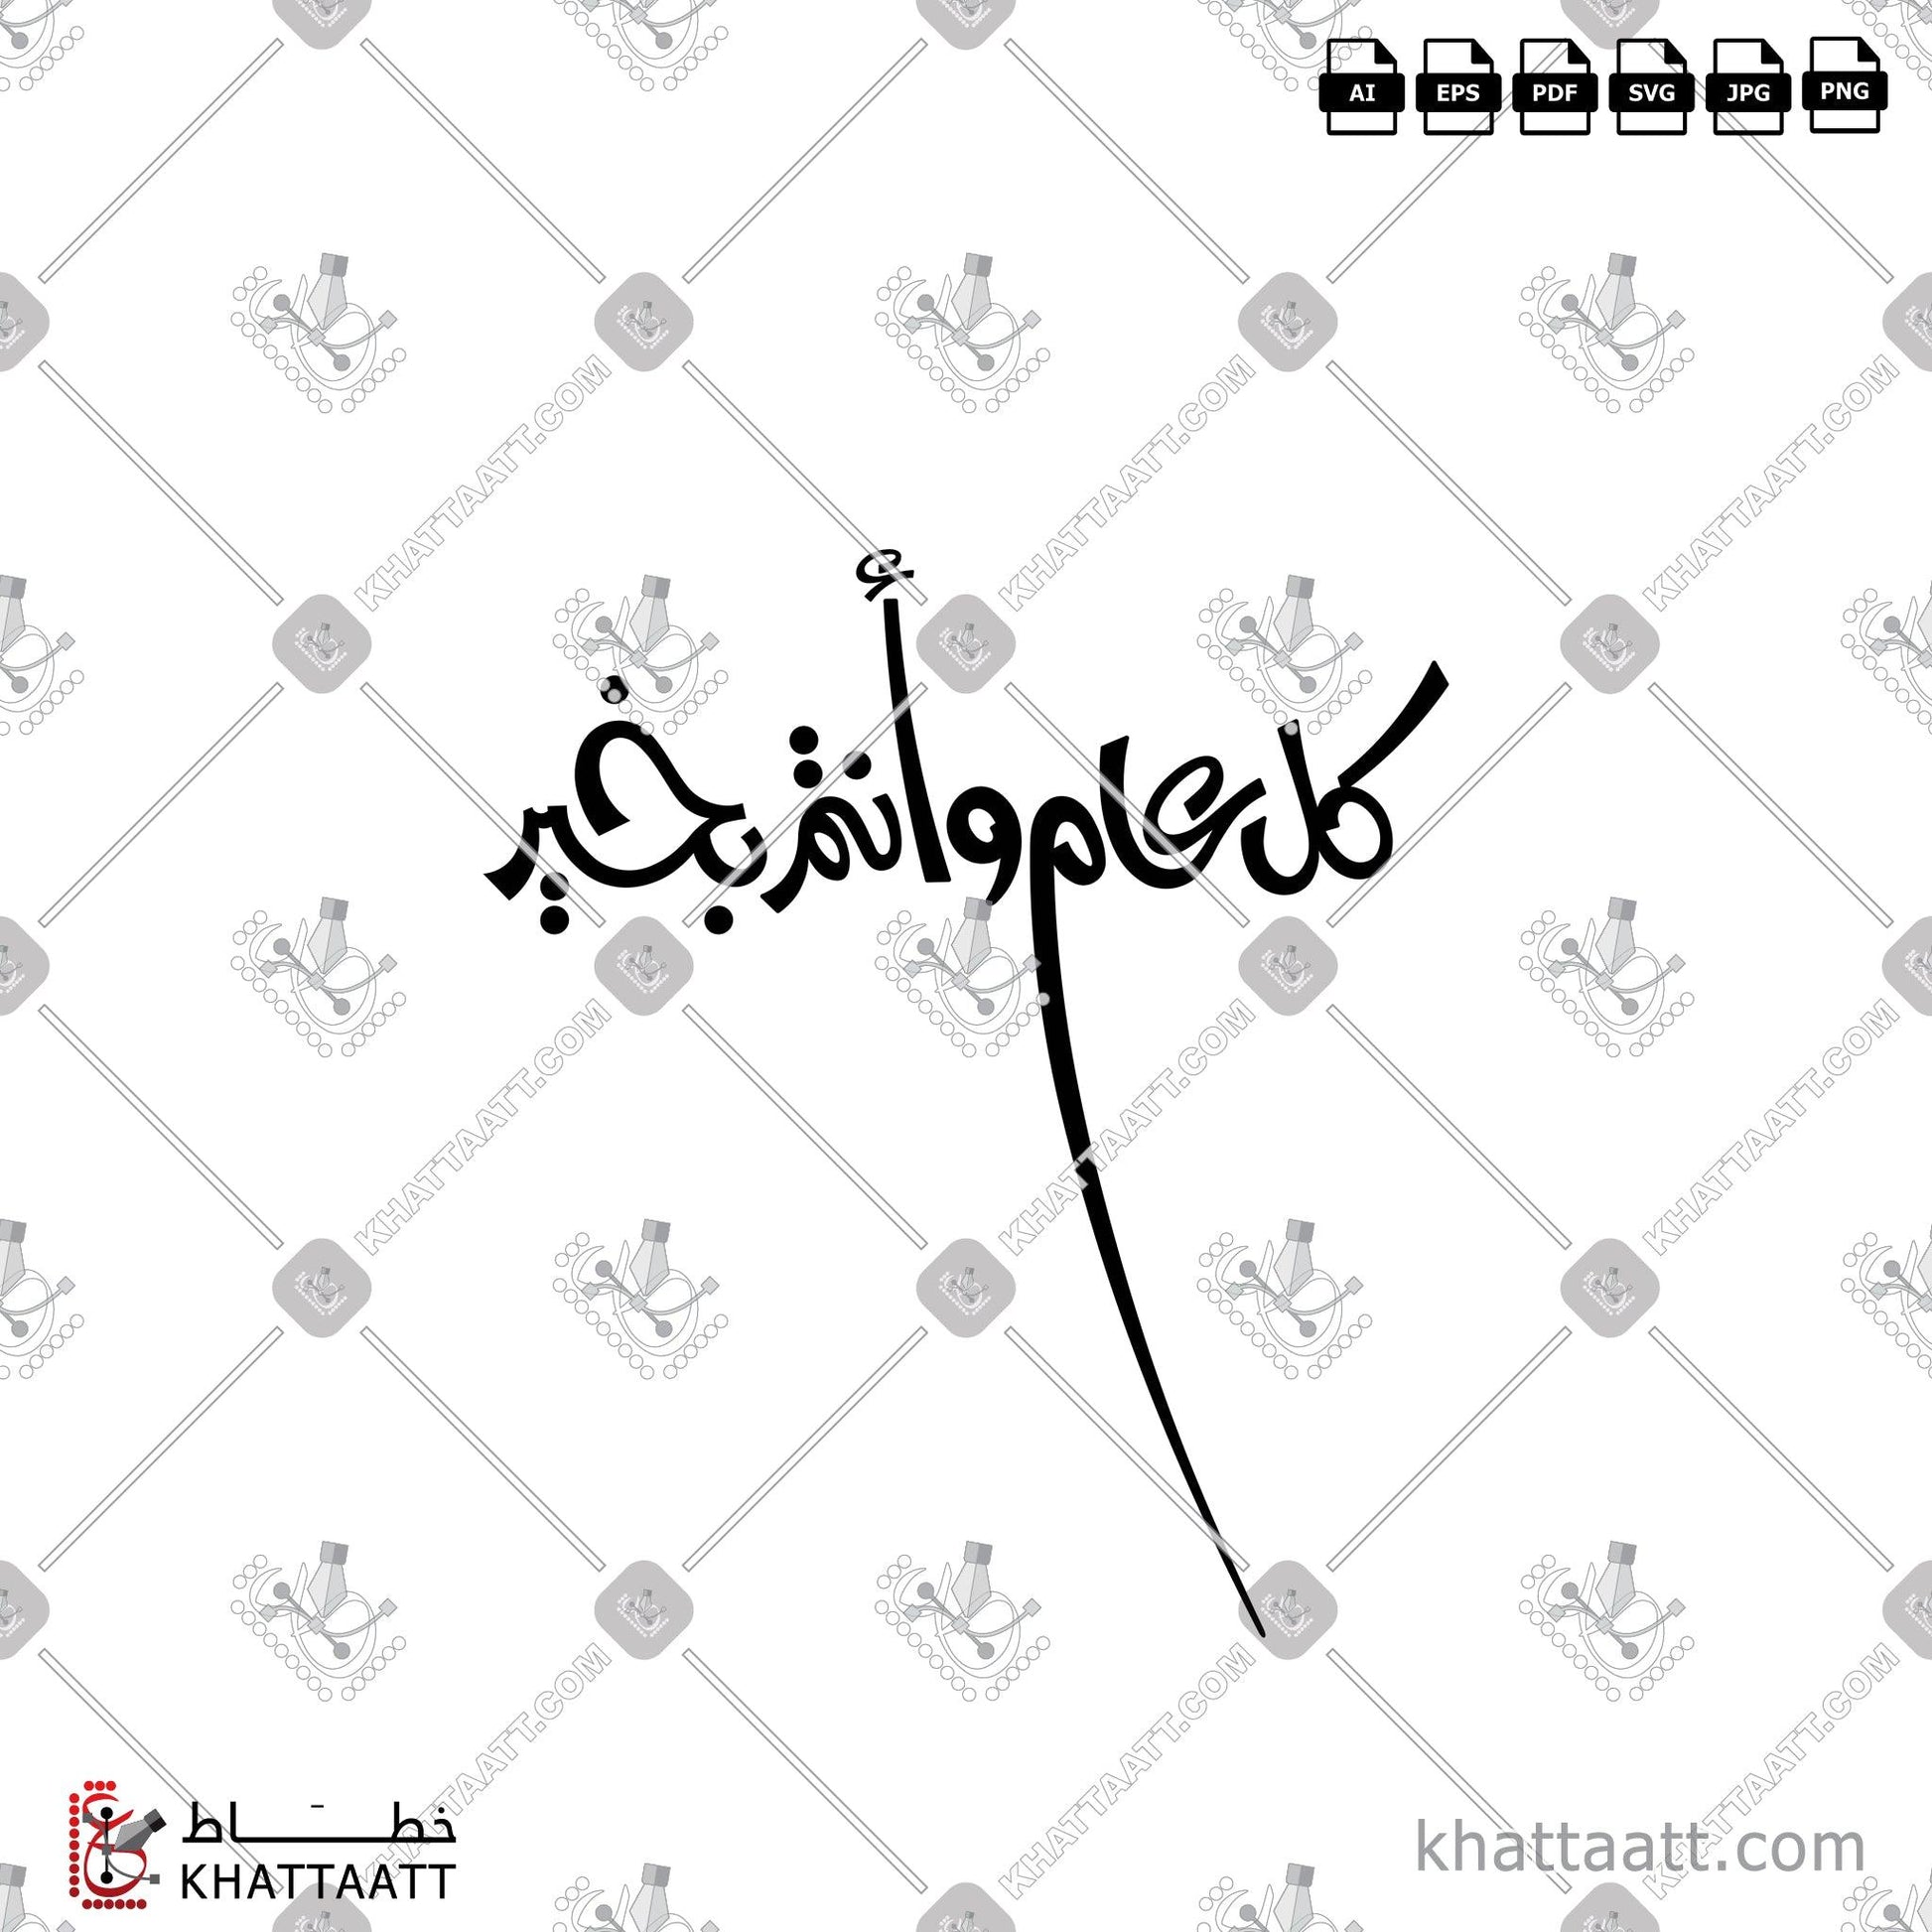 Download Arabic Calligraphy of كل عام وأنتم بخير in FreeStyle - الخط الحر in vector and .png